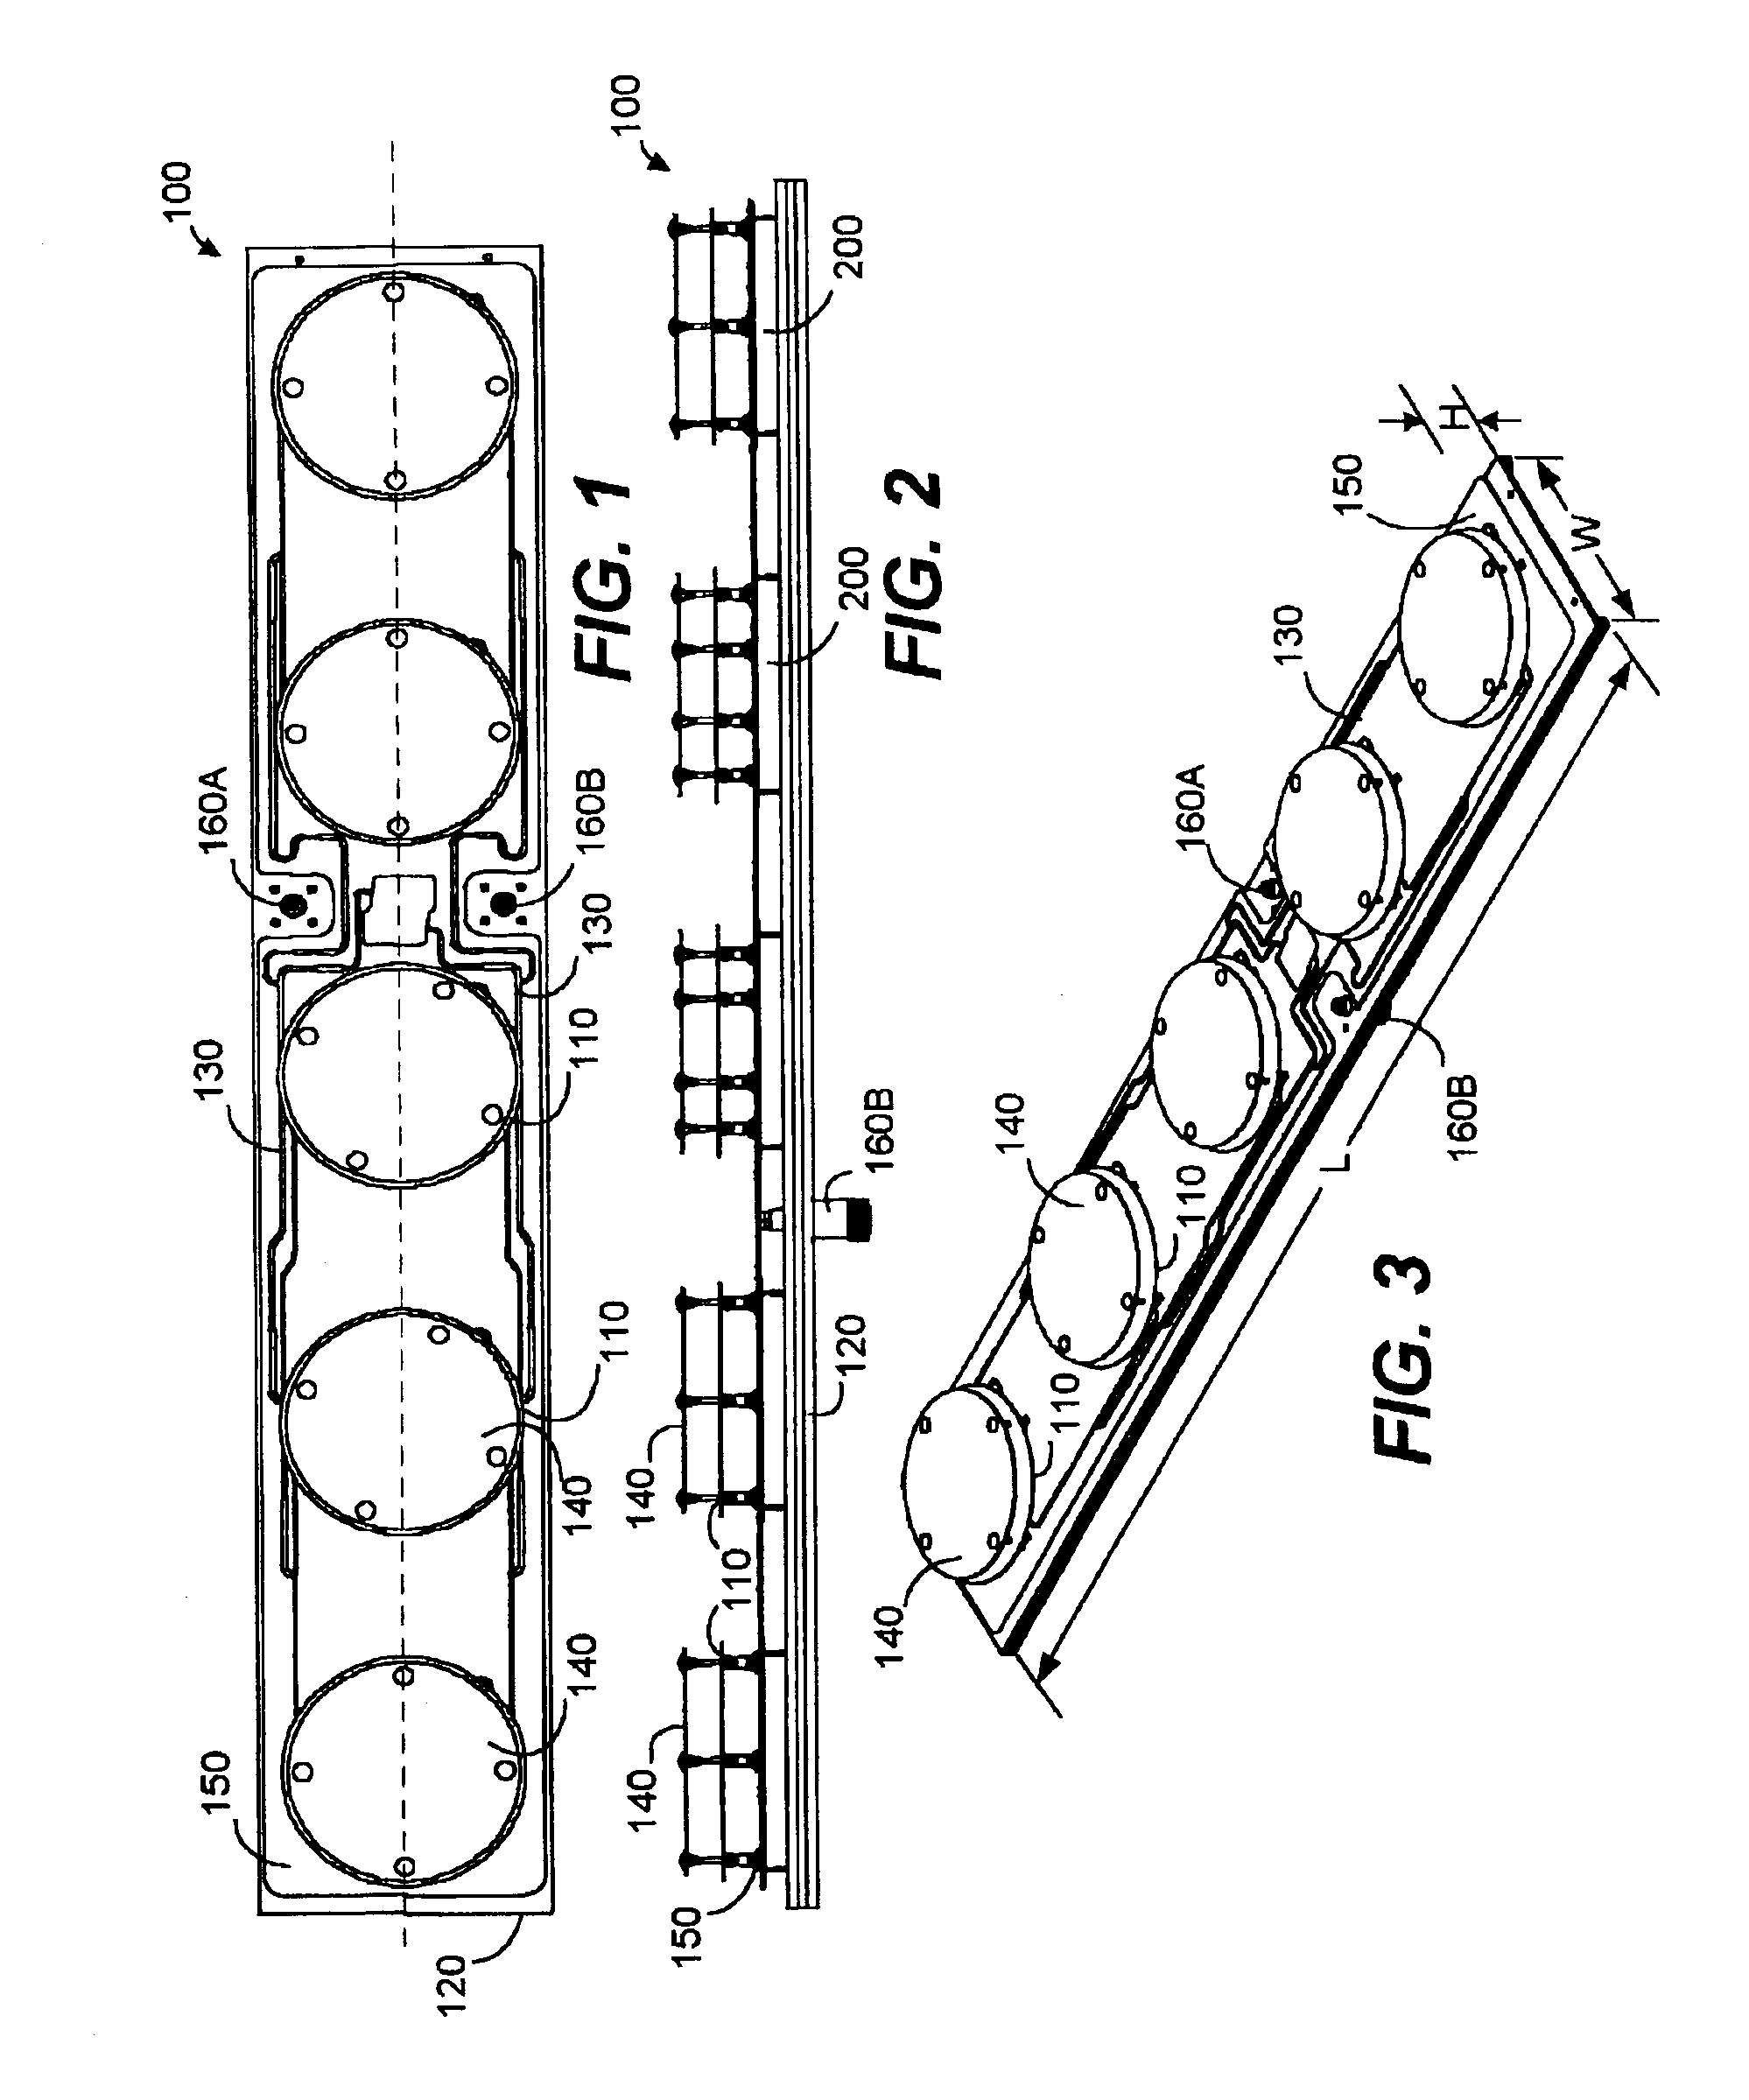 Patch and cavity for producing dual polarization states with controlled RF beamwidths